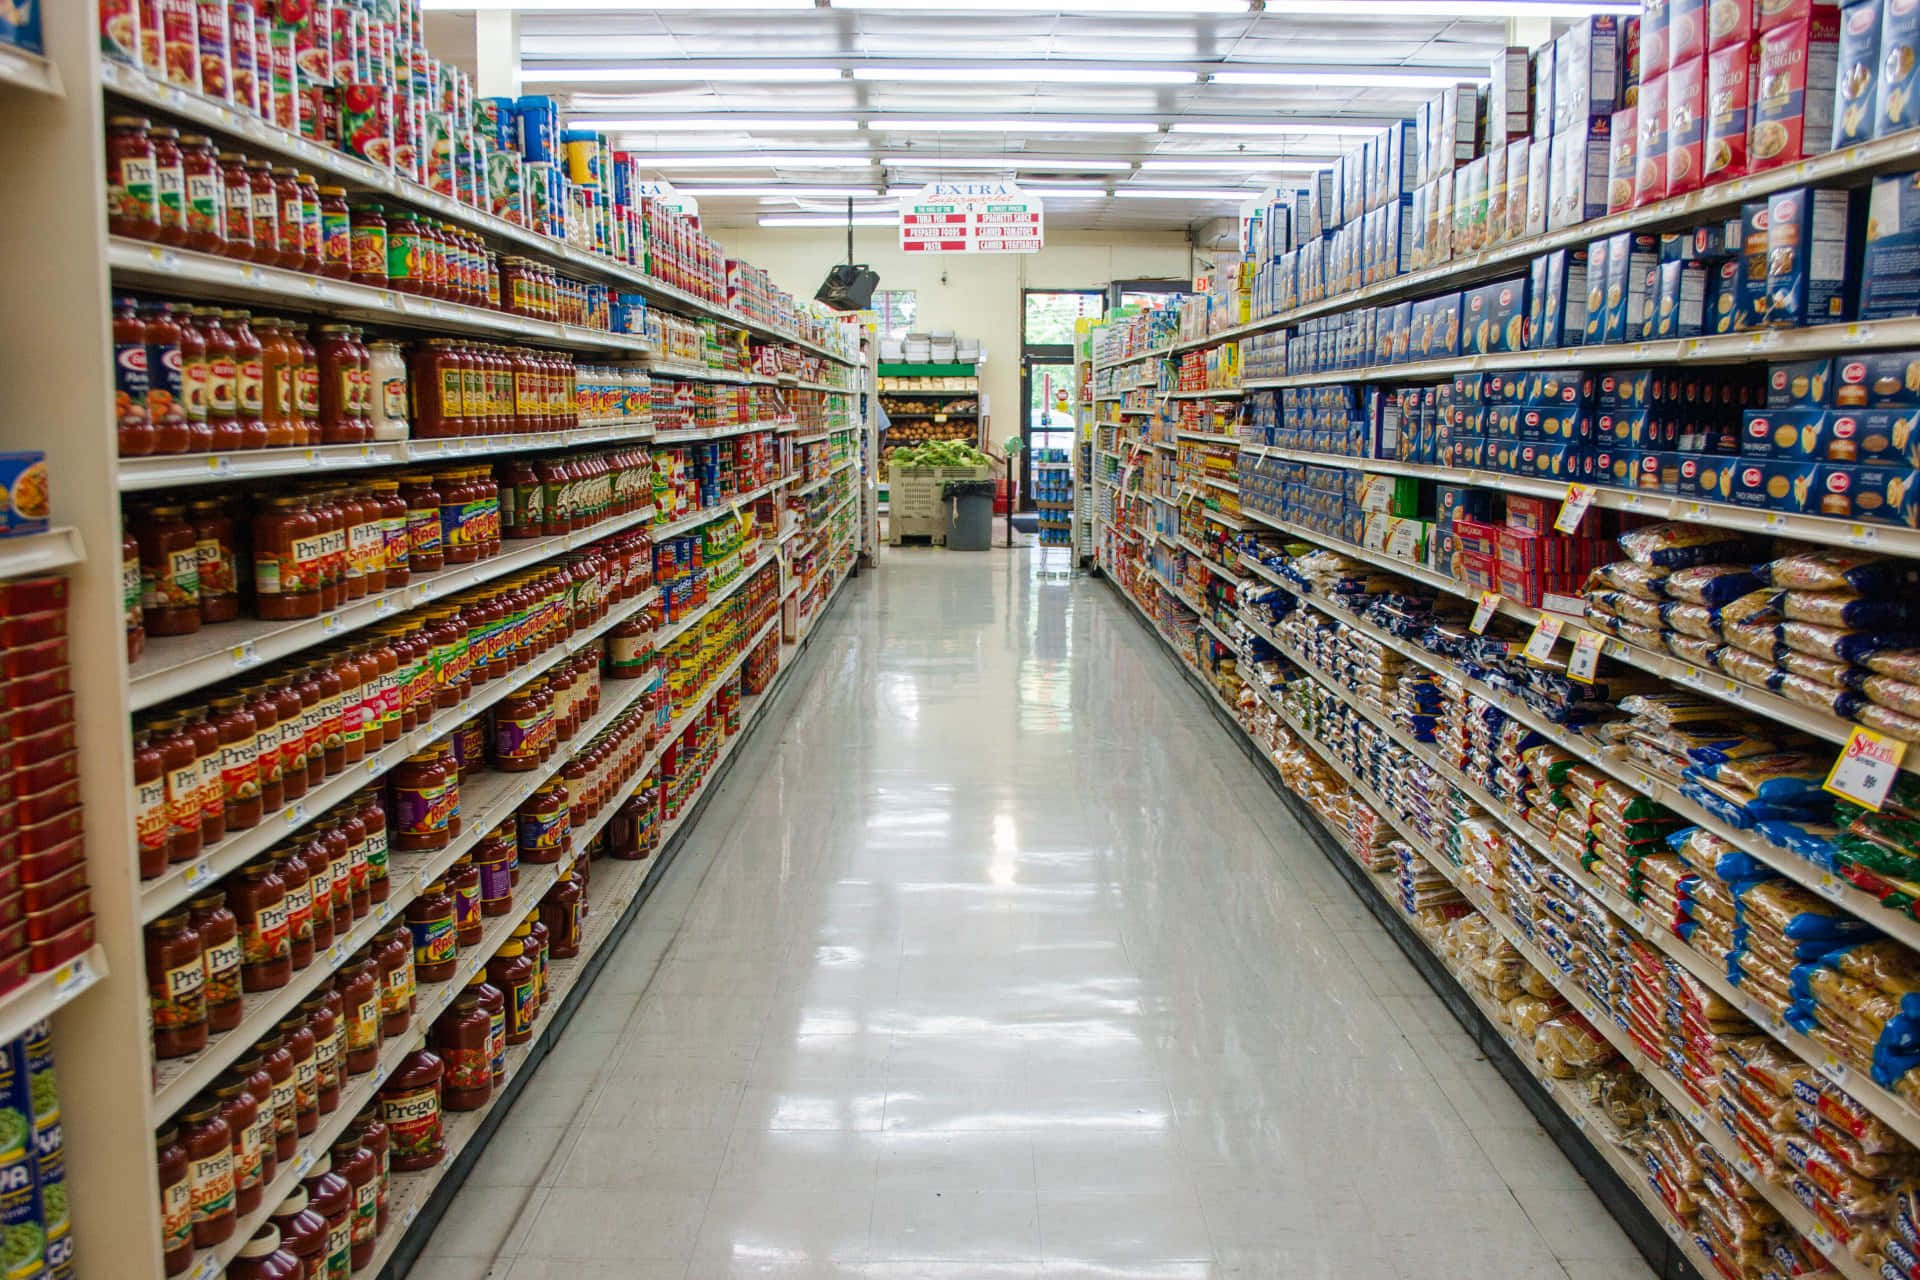 Aisles Of Food In A Grocery Store